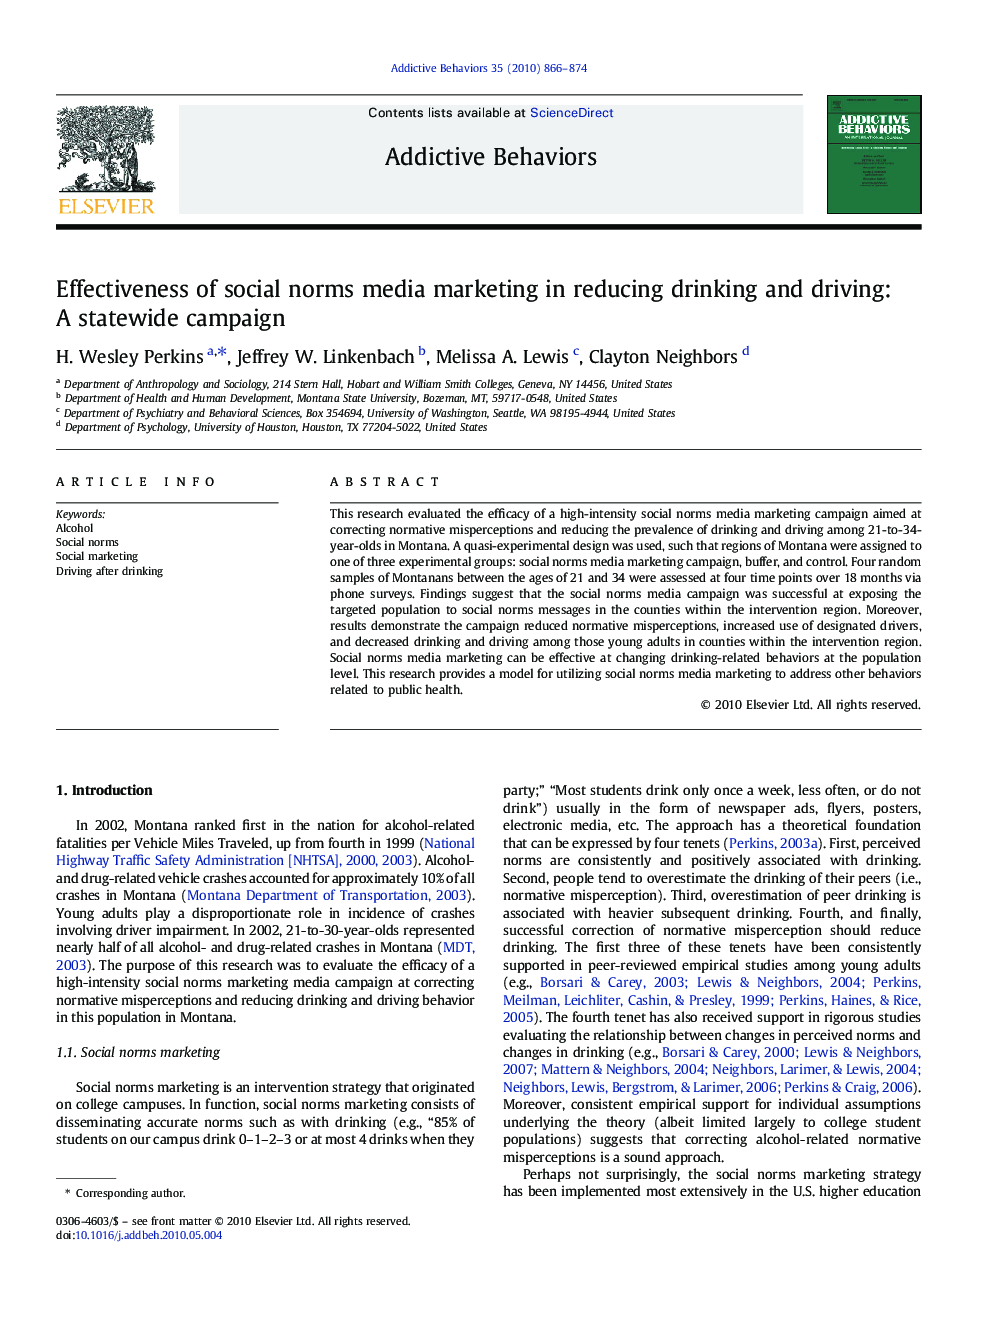 Effectiveness of social norms media marketing in reducing drinking and driving: A statewide campaign